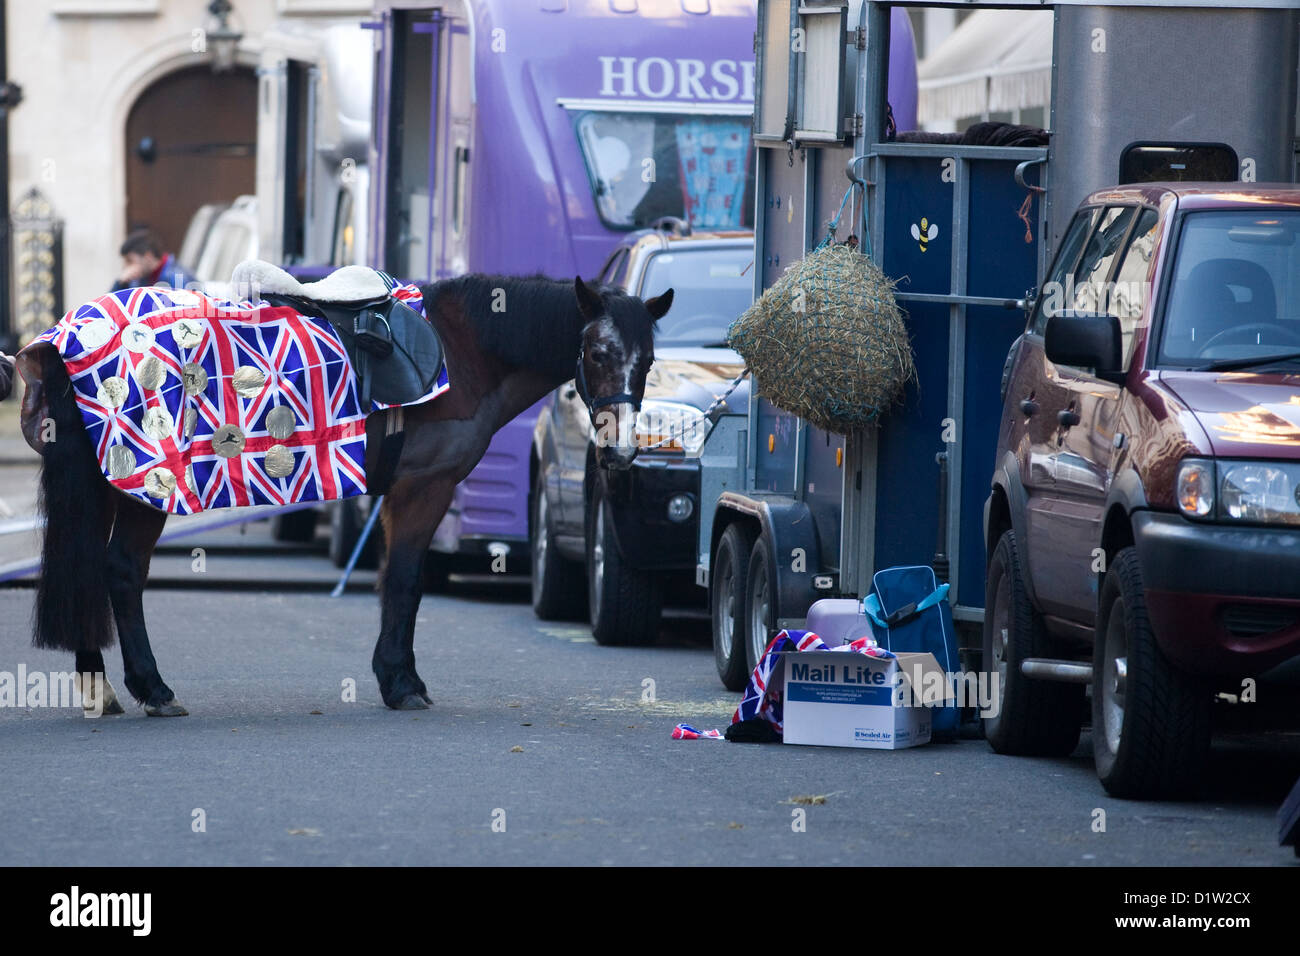 Horse stood by a horse box in Union Jack Rug in London UK Stock Photo